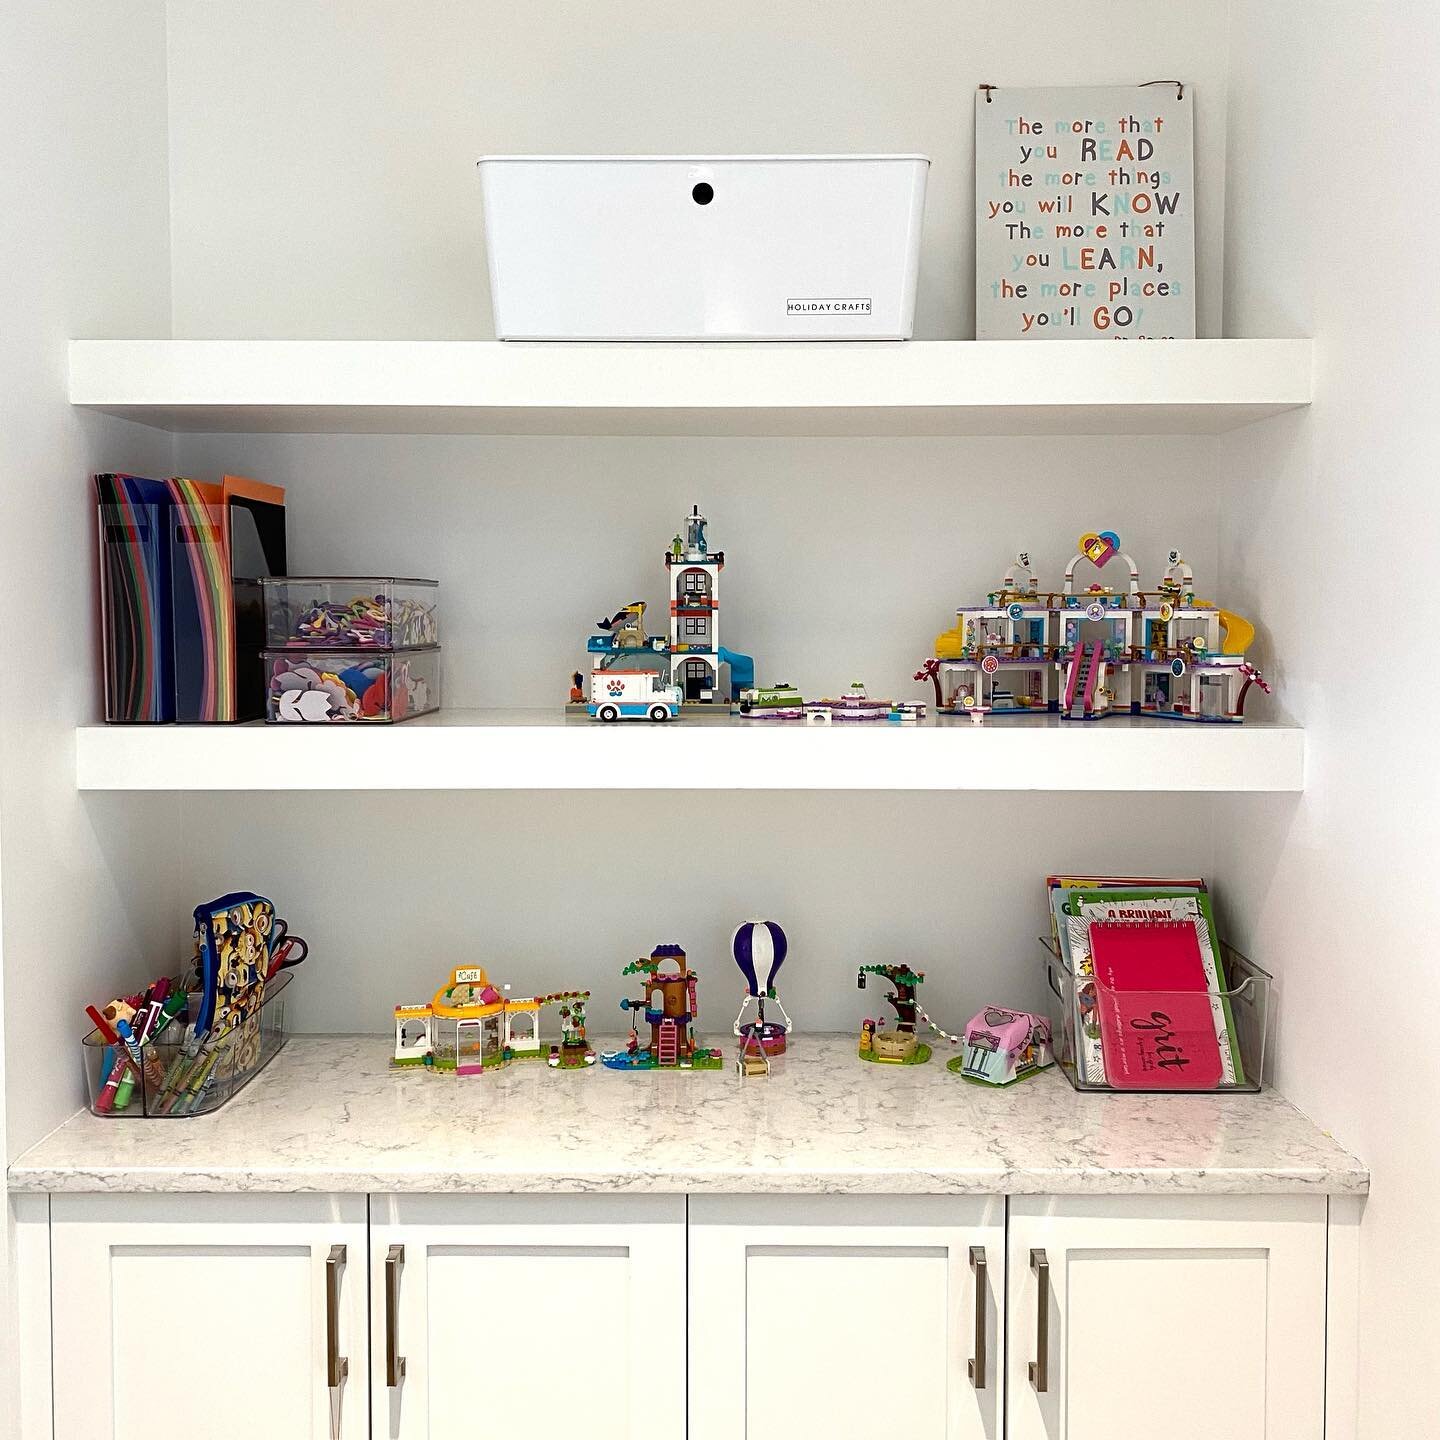 P L A Y R O O M S don&rsquo;t need to be complicated, they just need to compliment how the space is being used.  This area in the playroom has been re-envisioned a few times over the years to coincide with the changing needs of the children using the